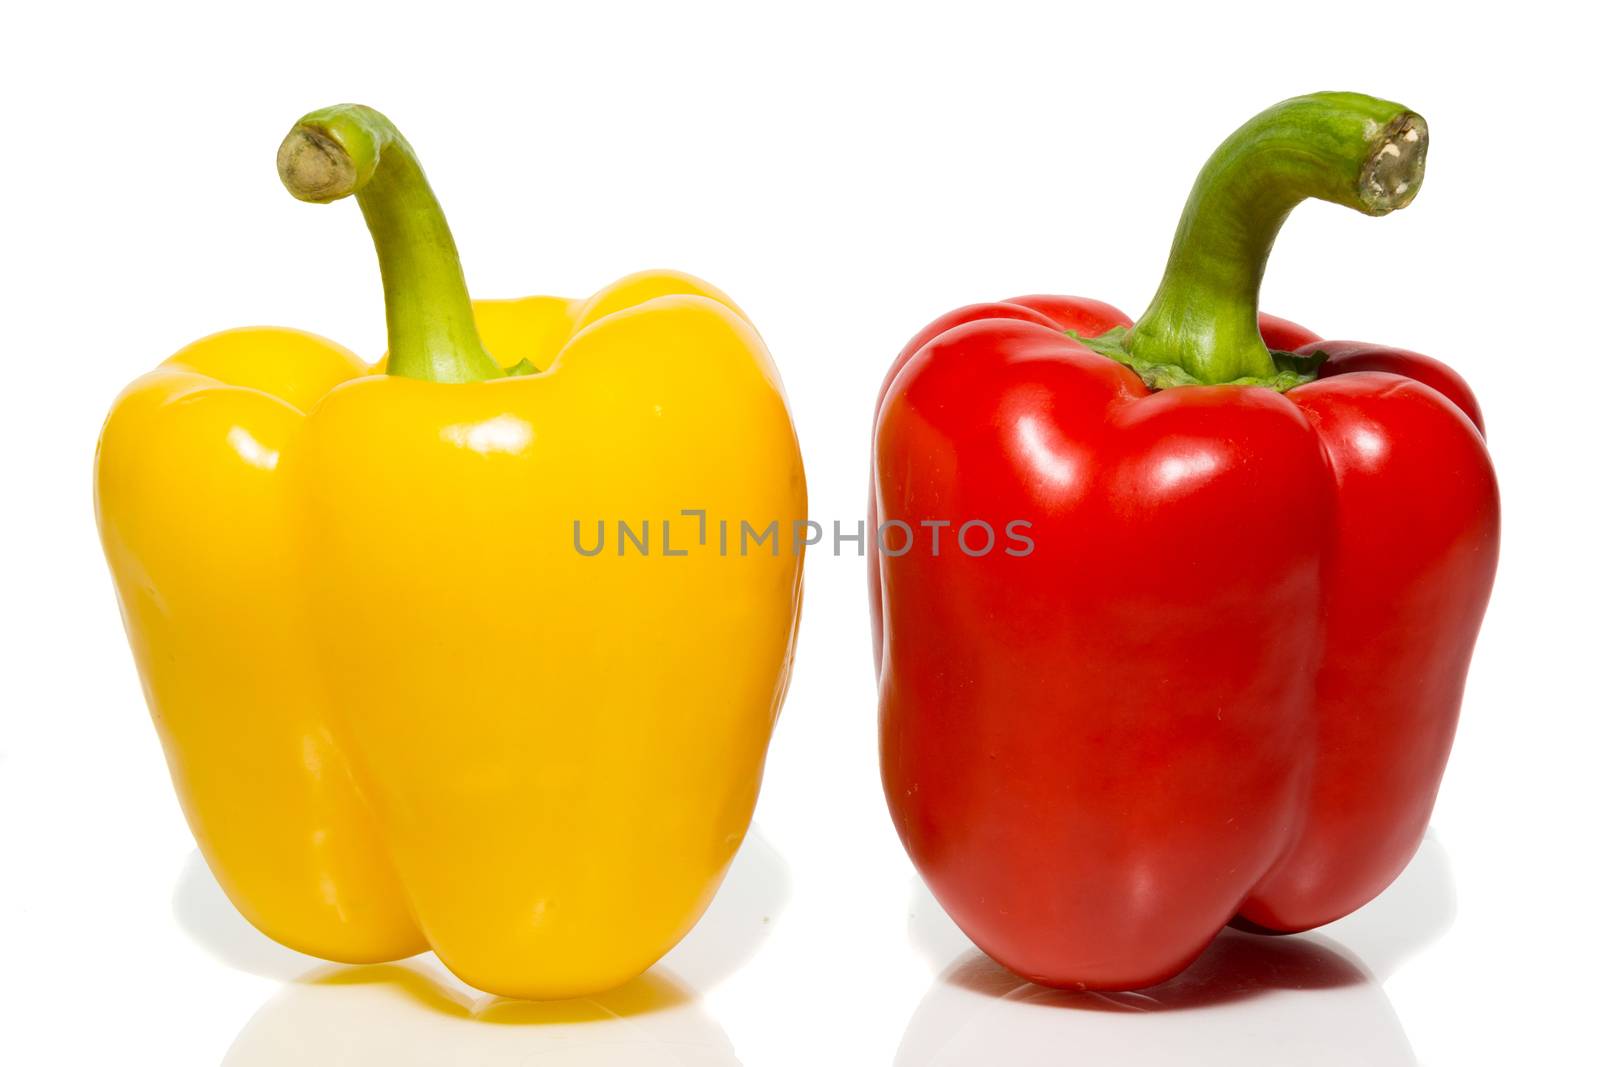 The photograph depicts peppers on a white background